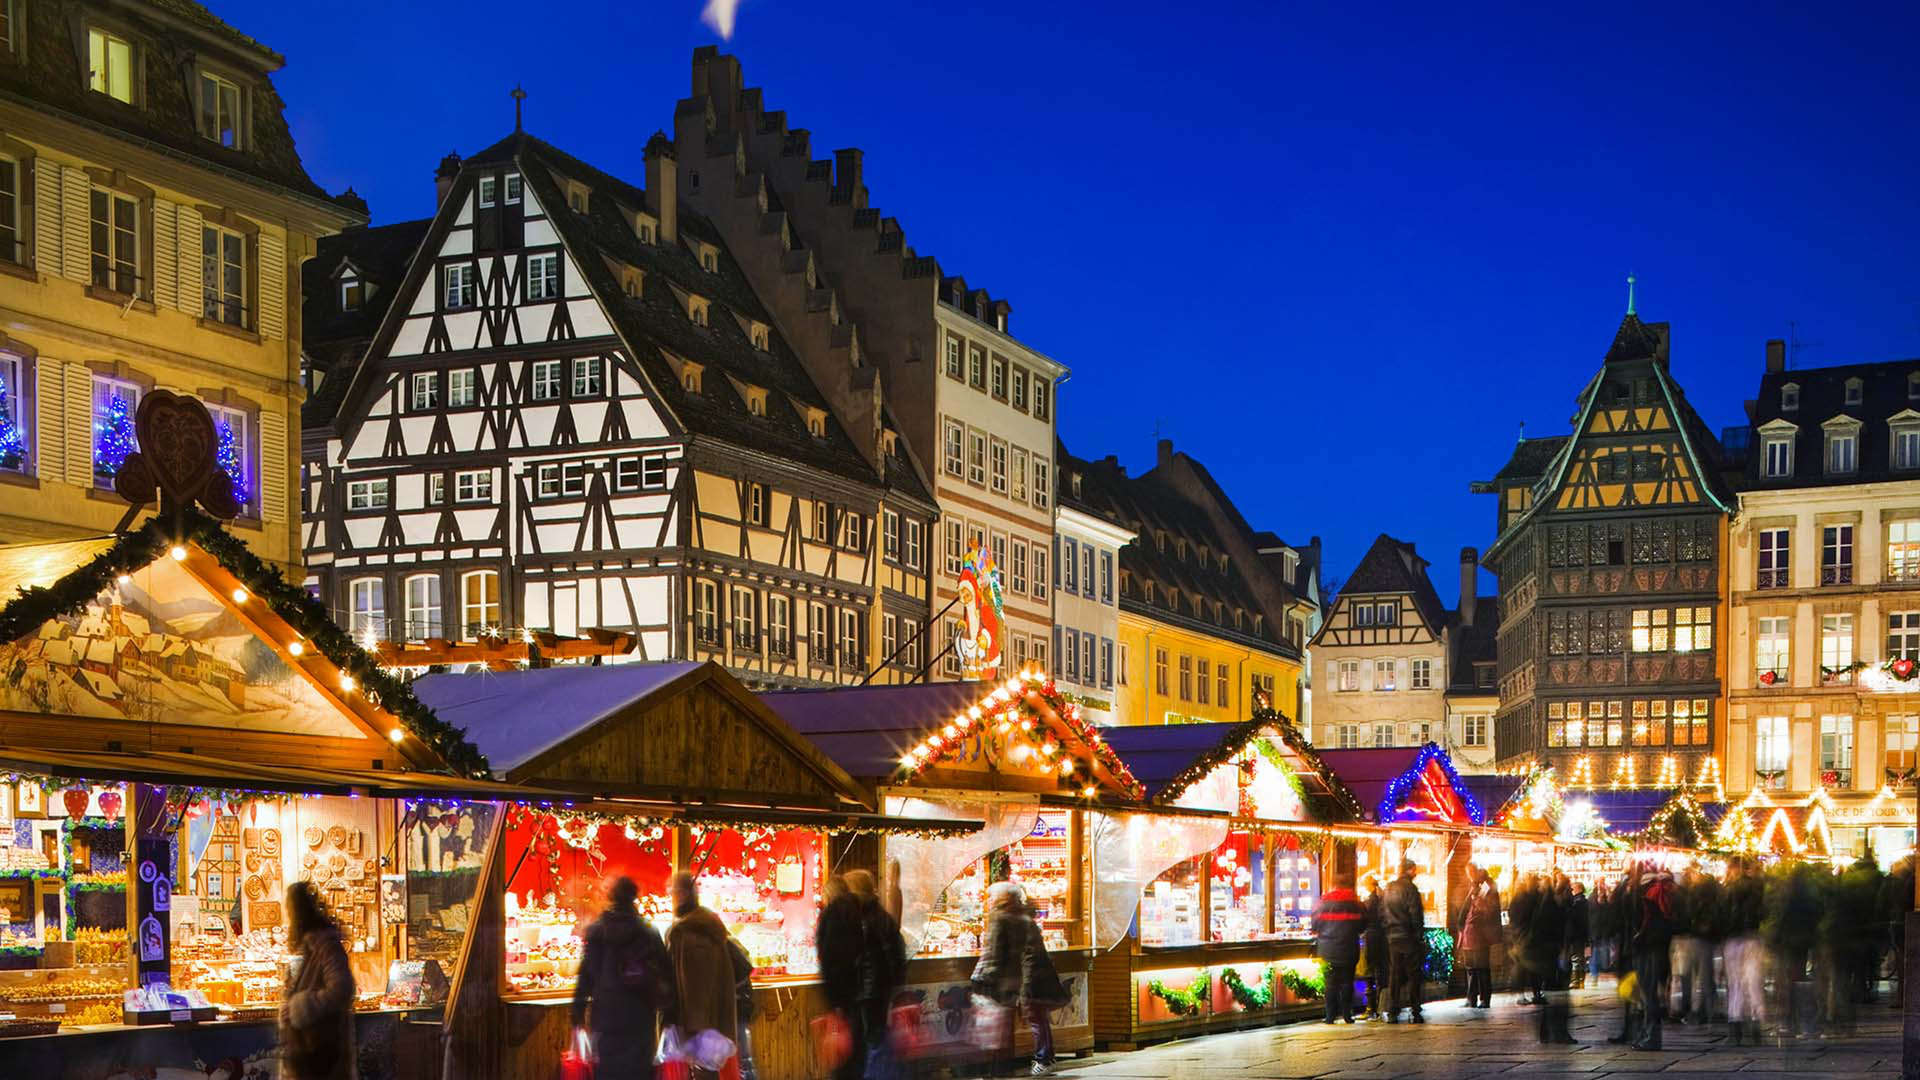 Shop for holiday treats at the annual Christmas Market in Strasbourg